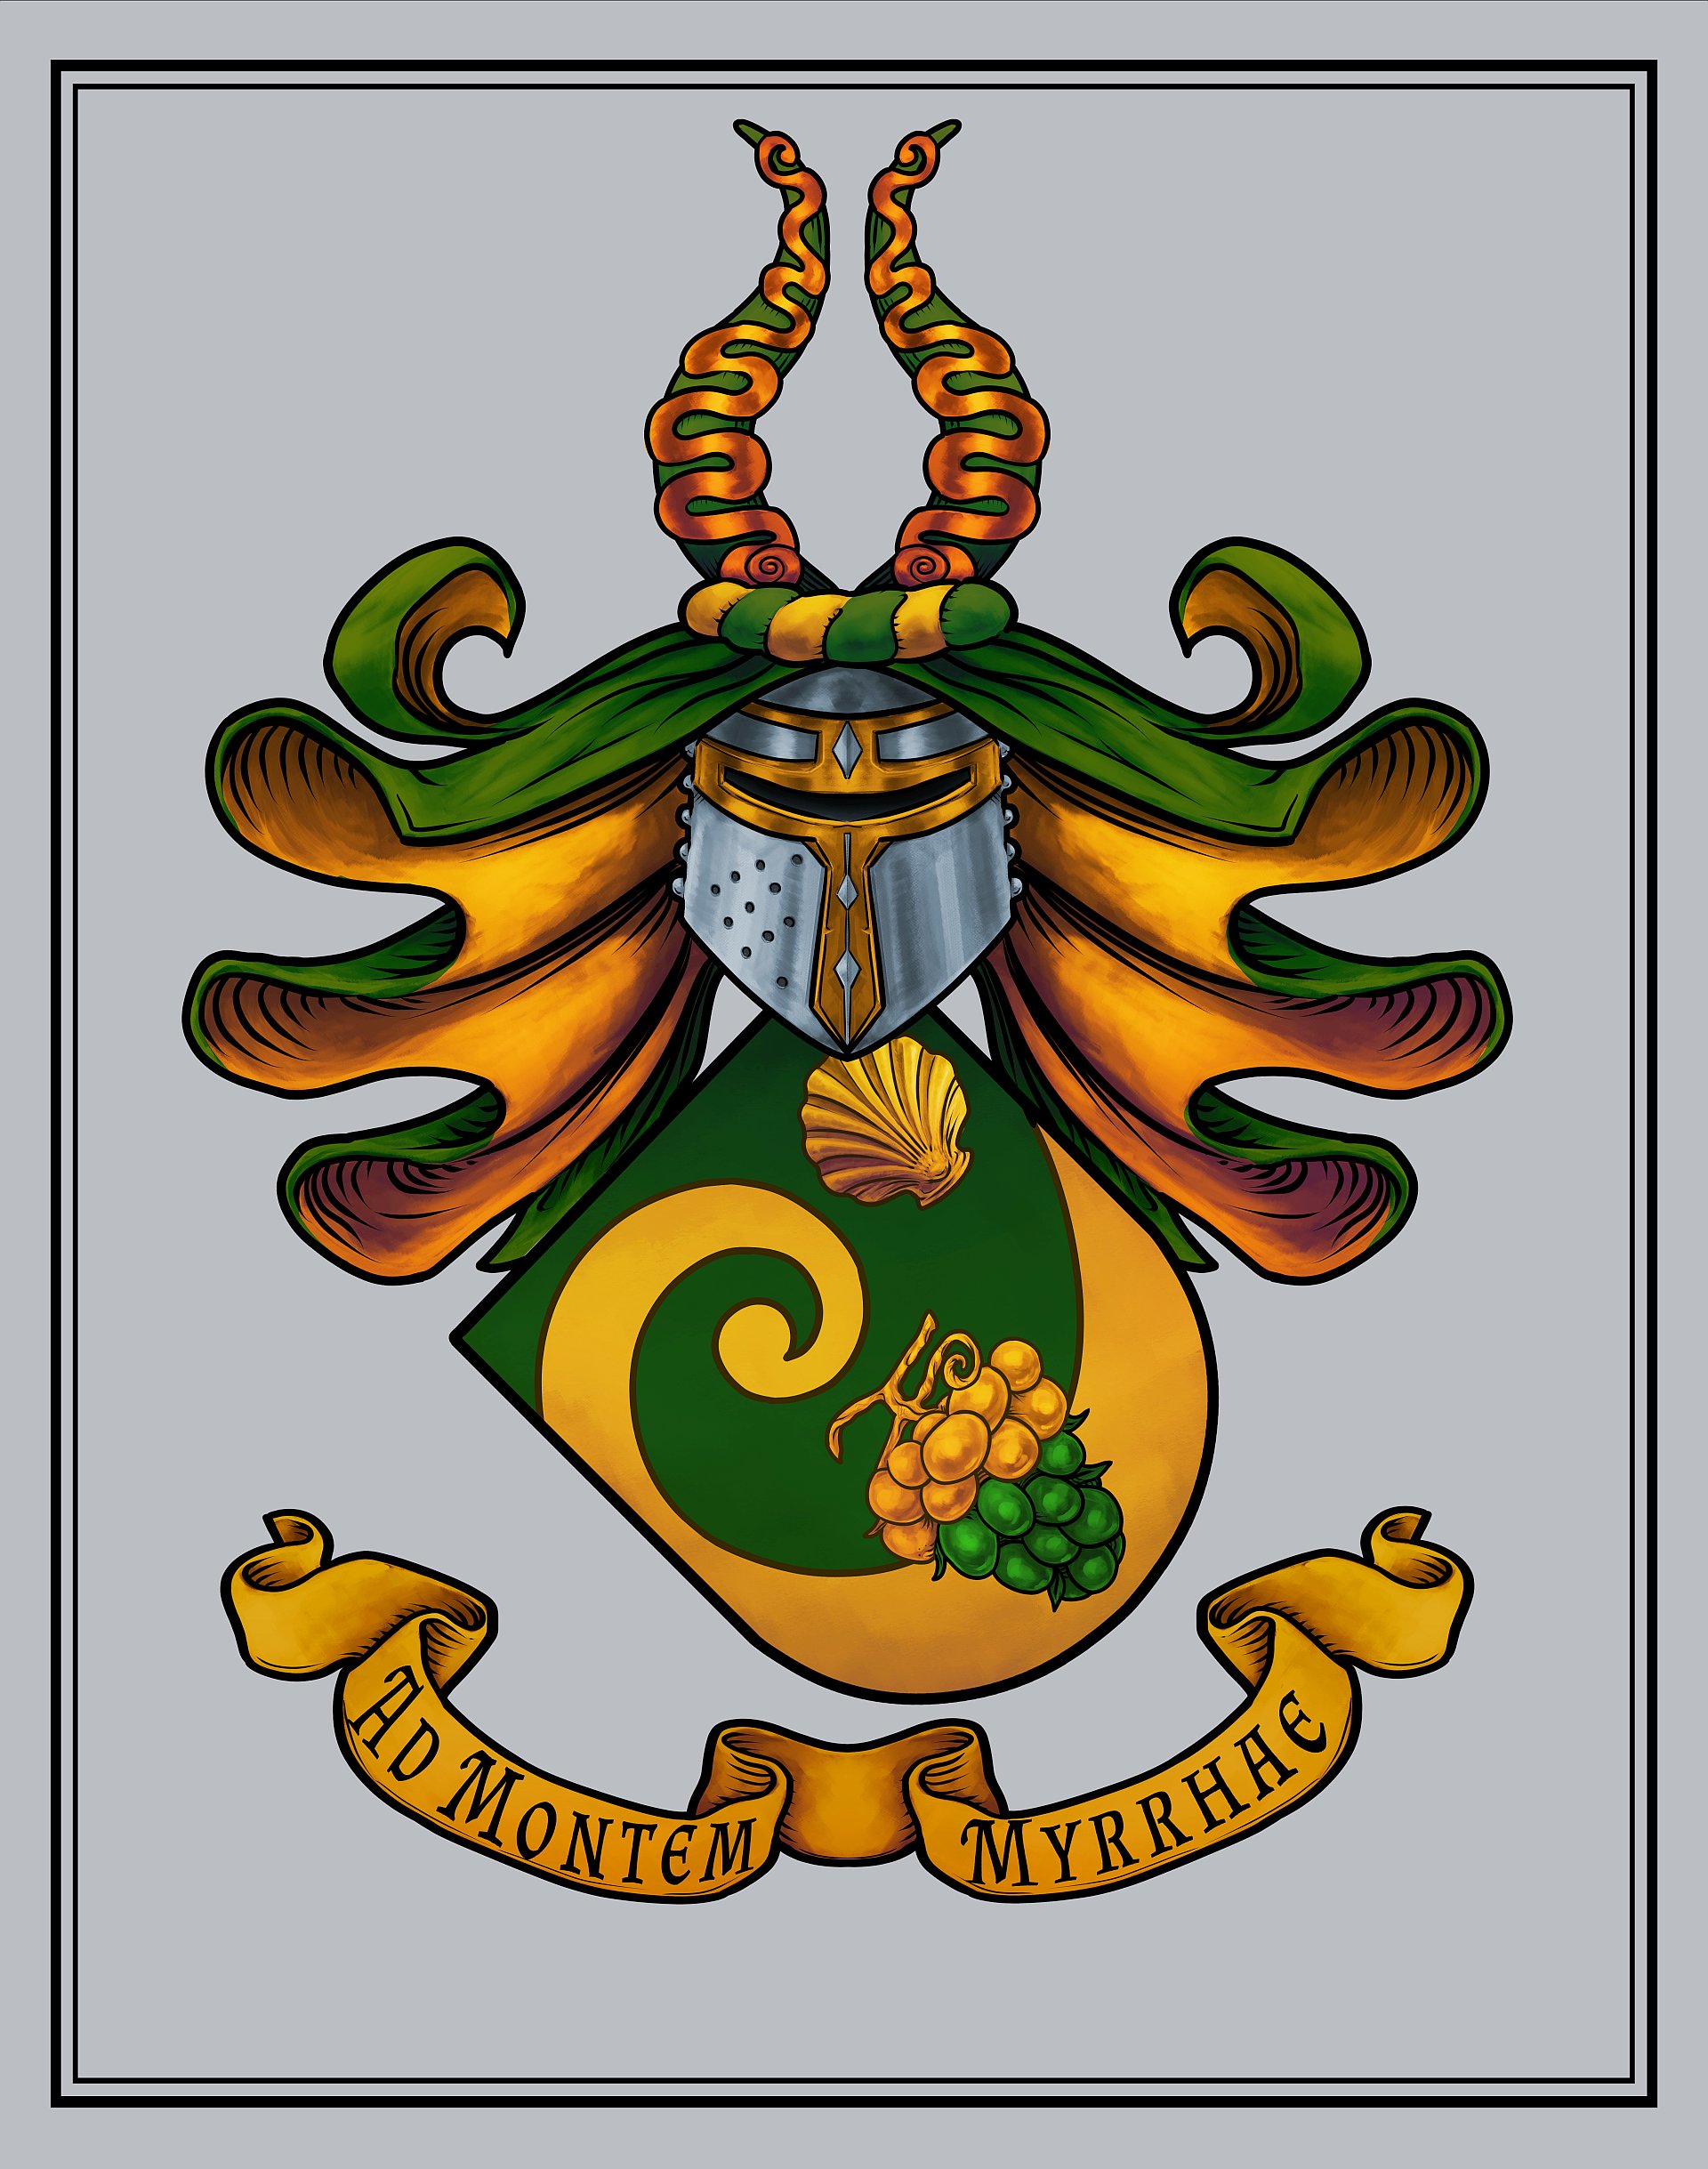 Kalter Coat of Arms by Nick Truvor